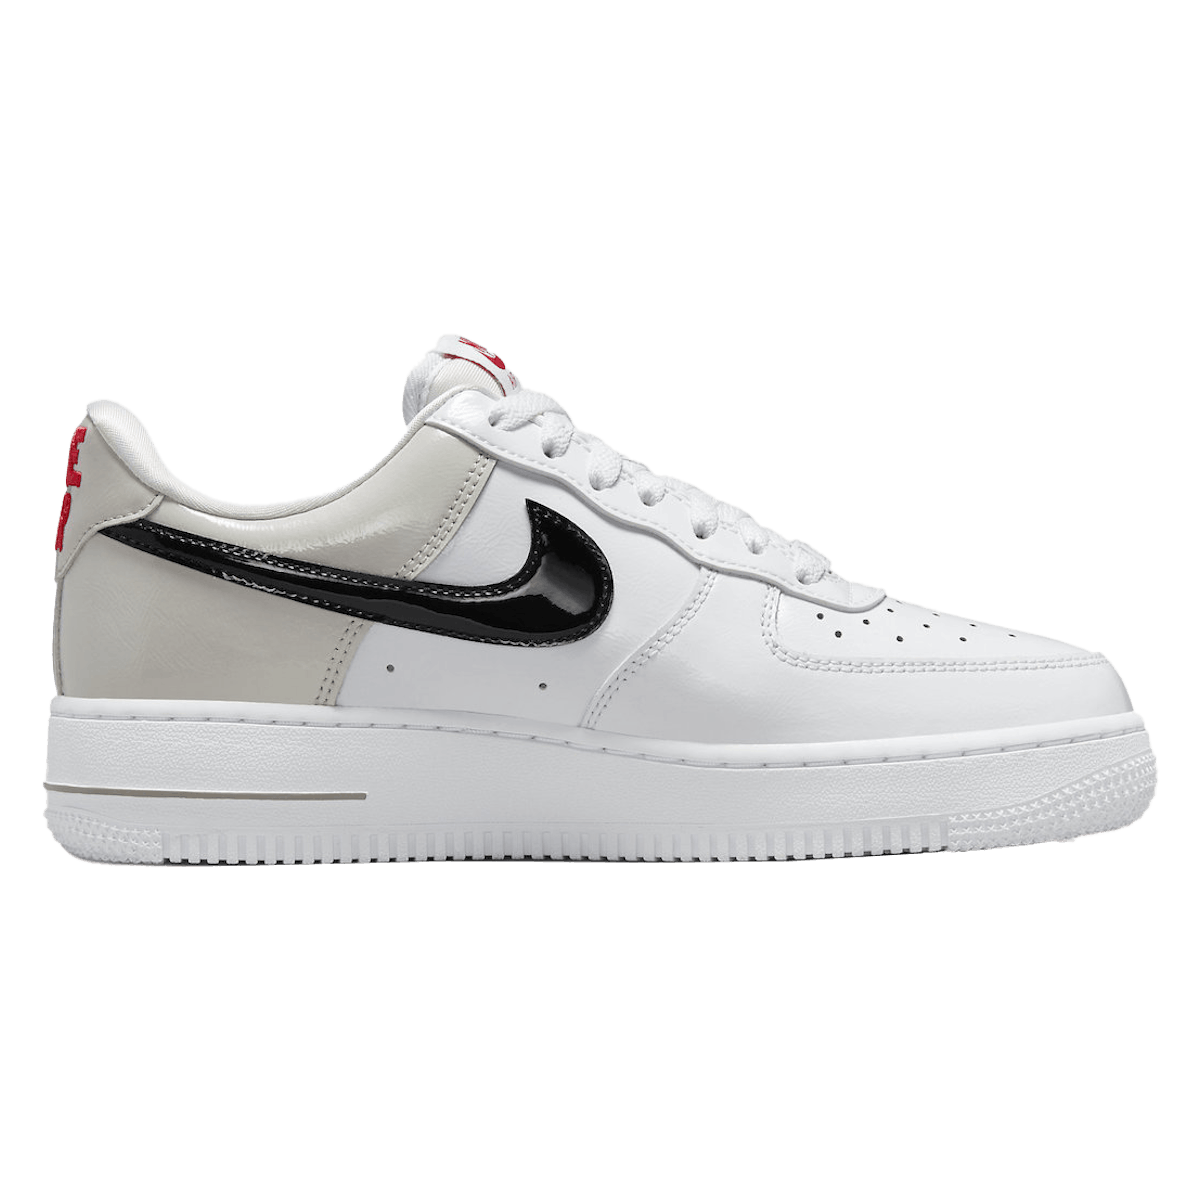 Nike Air Force 1 Low "Light Iron Ore"